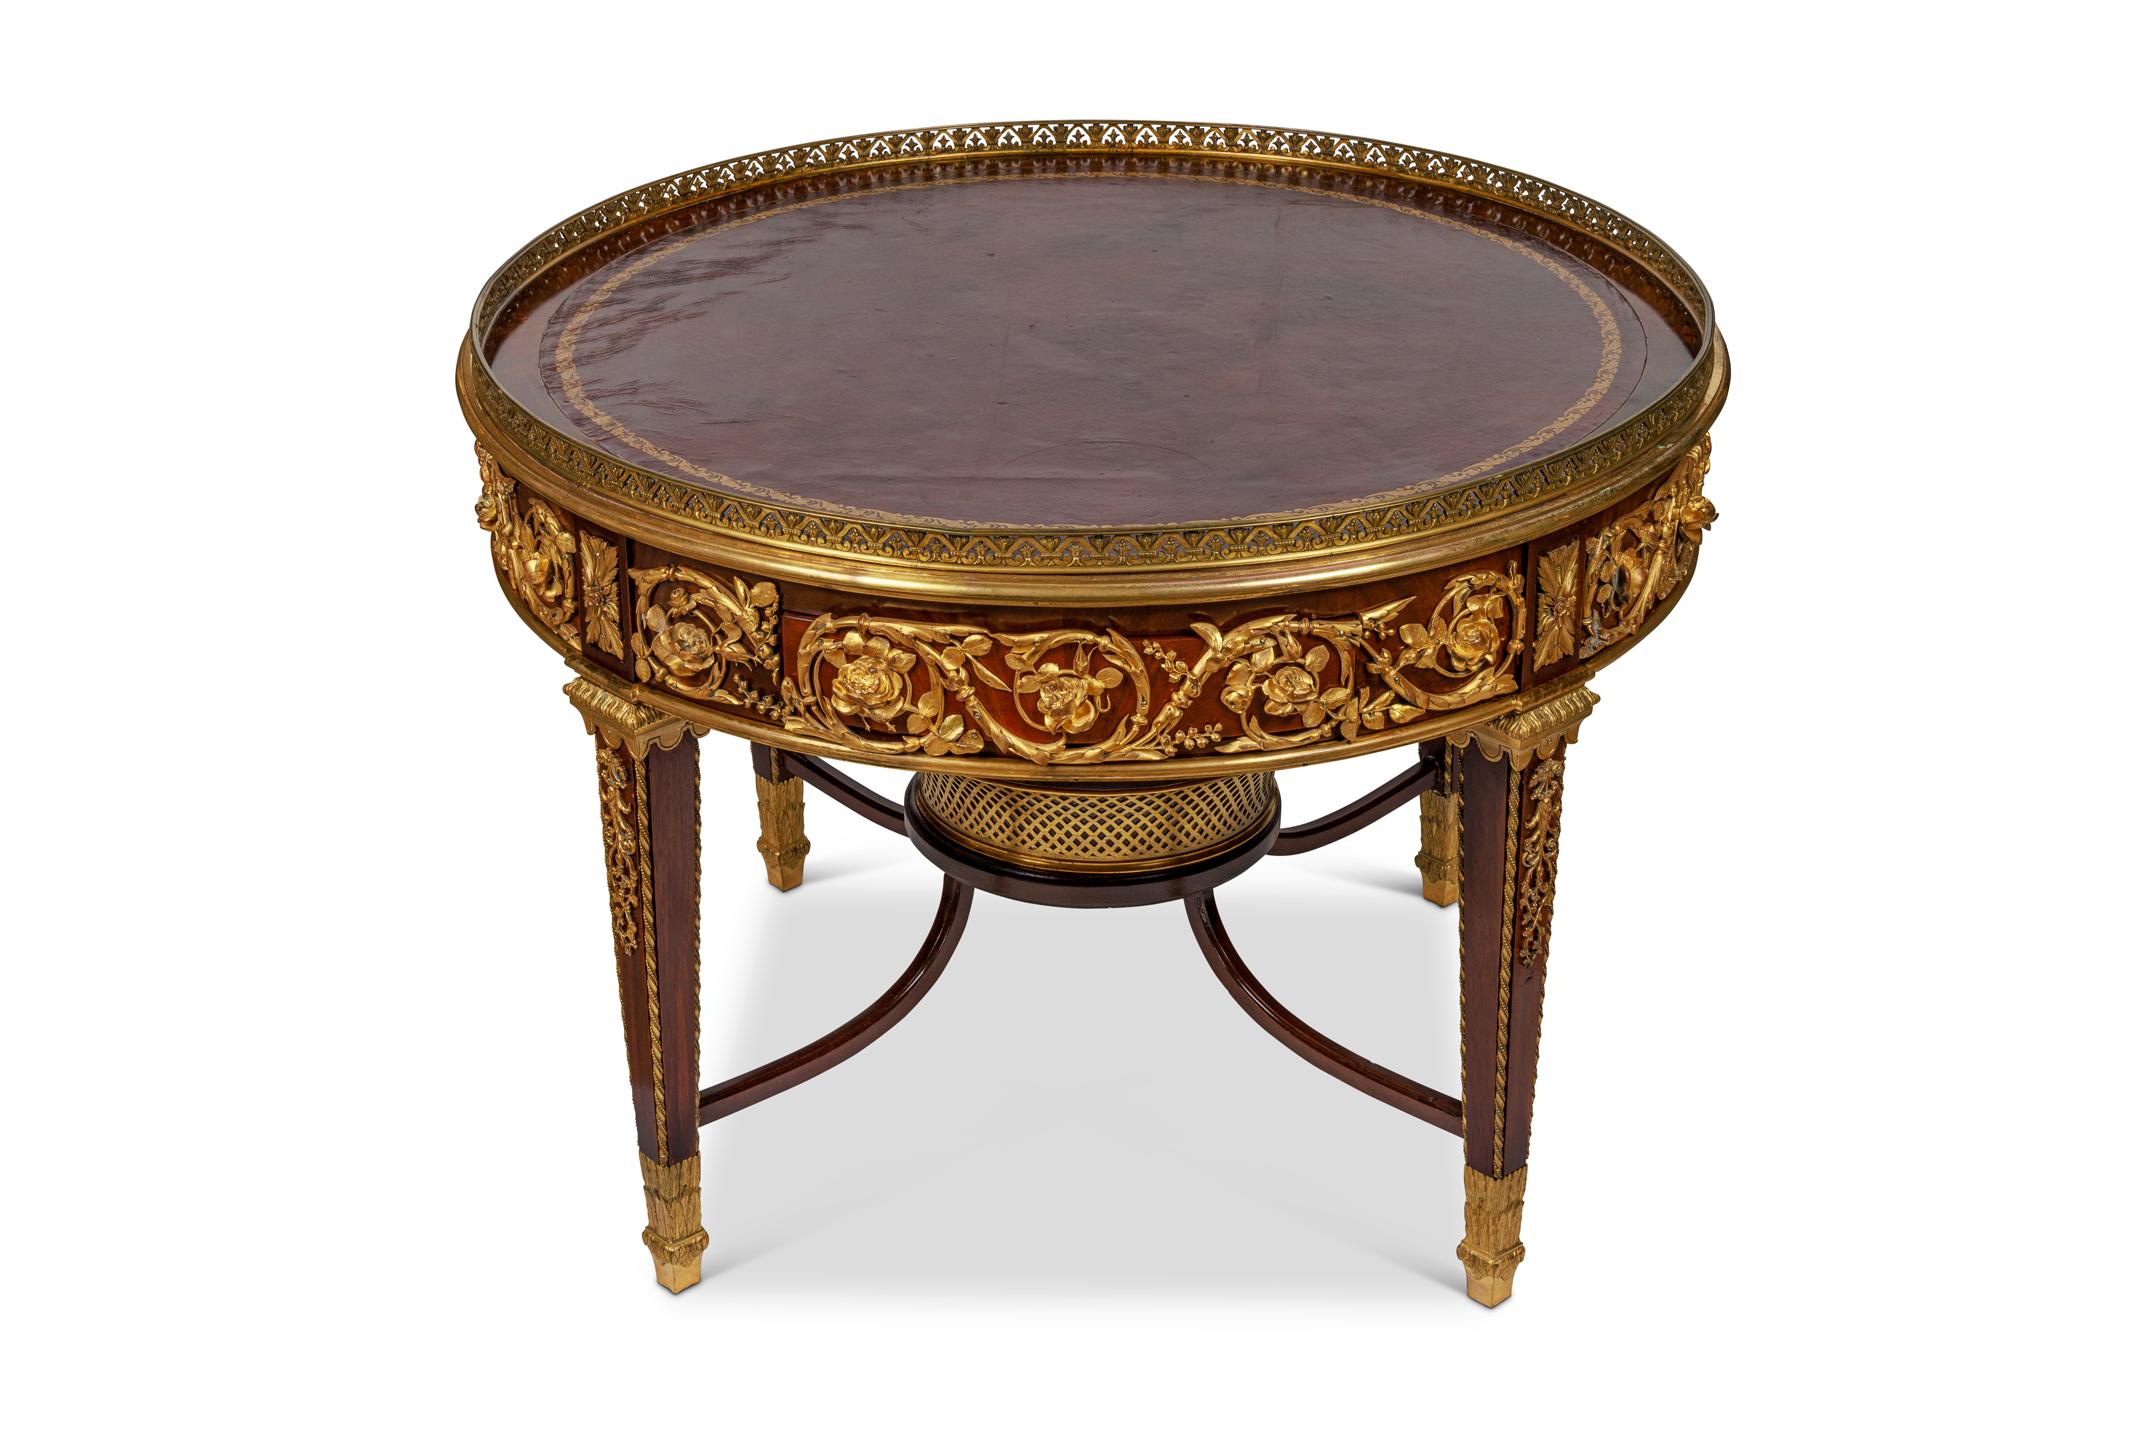 An exceptional quality Louis XVI style French ormolu-mounted mahogany and leather coffee center table, attributed to Francois Linke, Paris, circa 1880.

With exceptional quality ormolu mounts throughout. 

Has two drawers and two slide outs. The